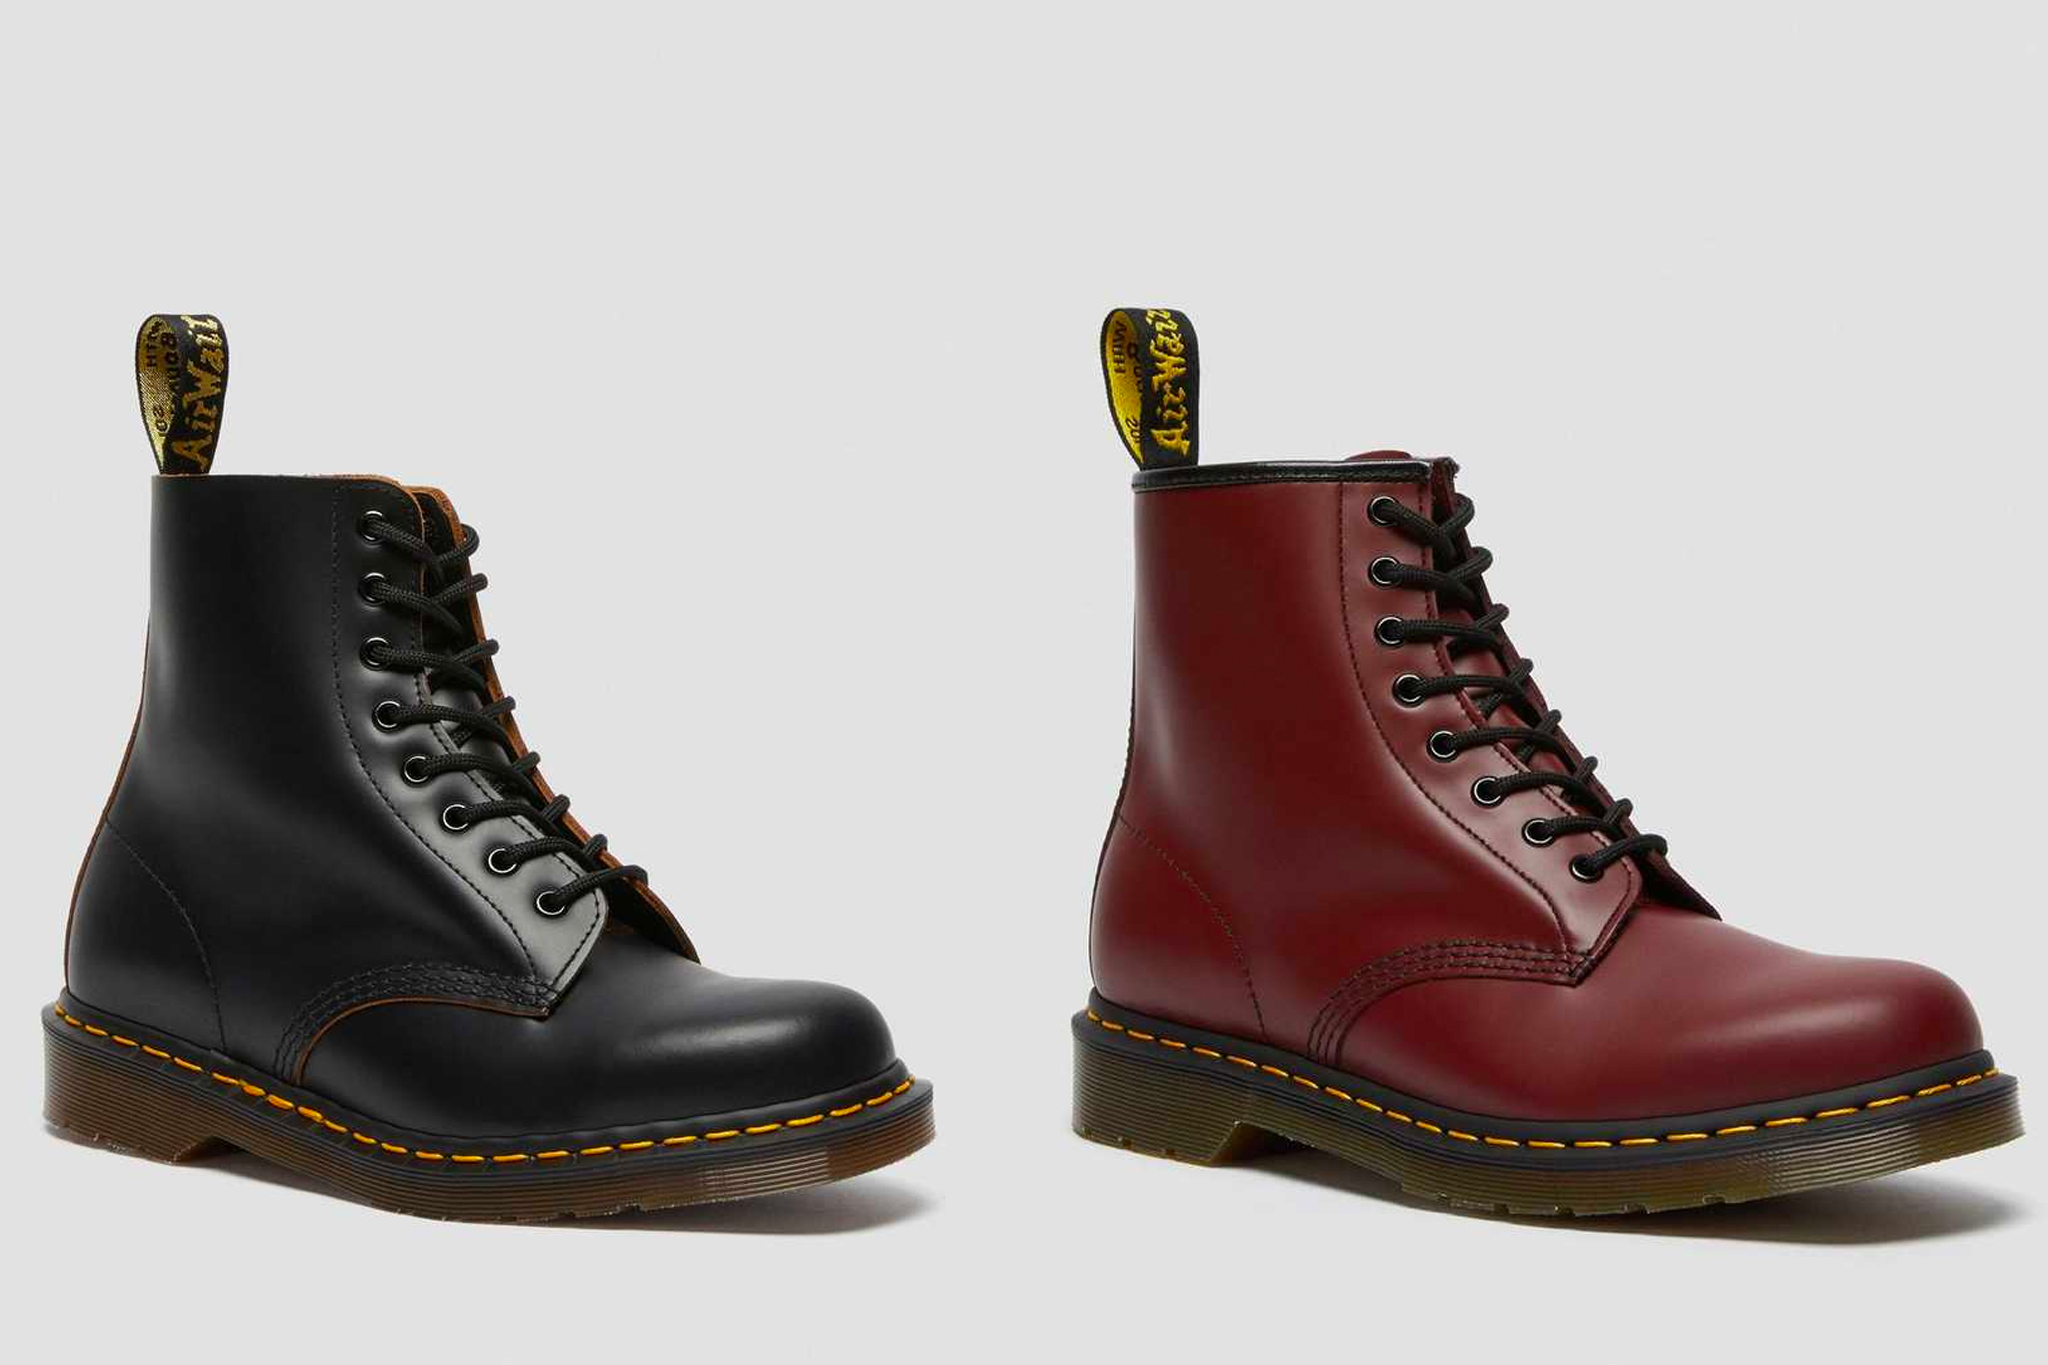 Dr. Martens Originals vs. Made in England: What's the difference?